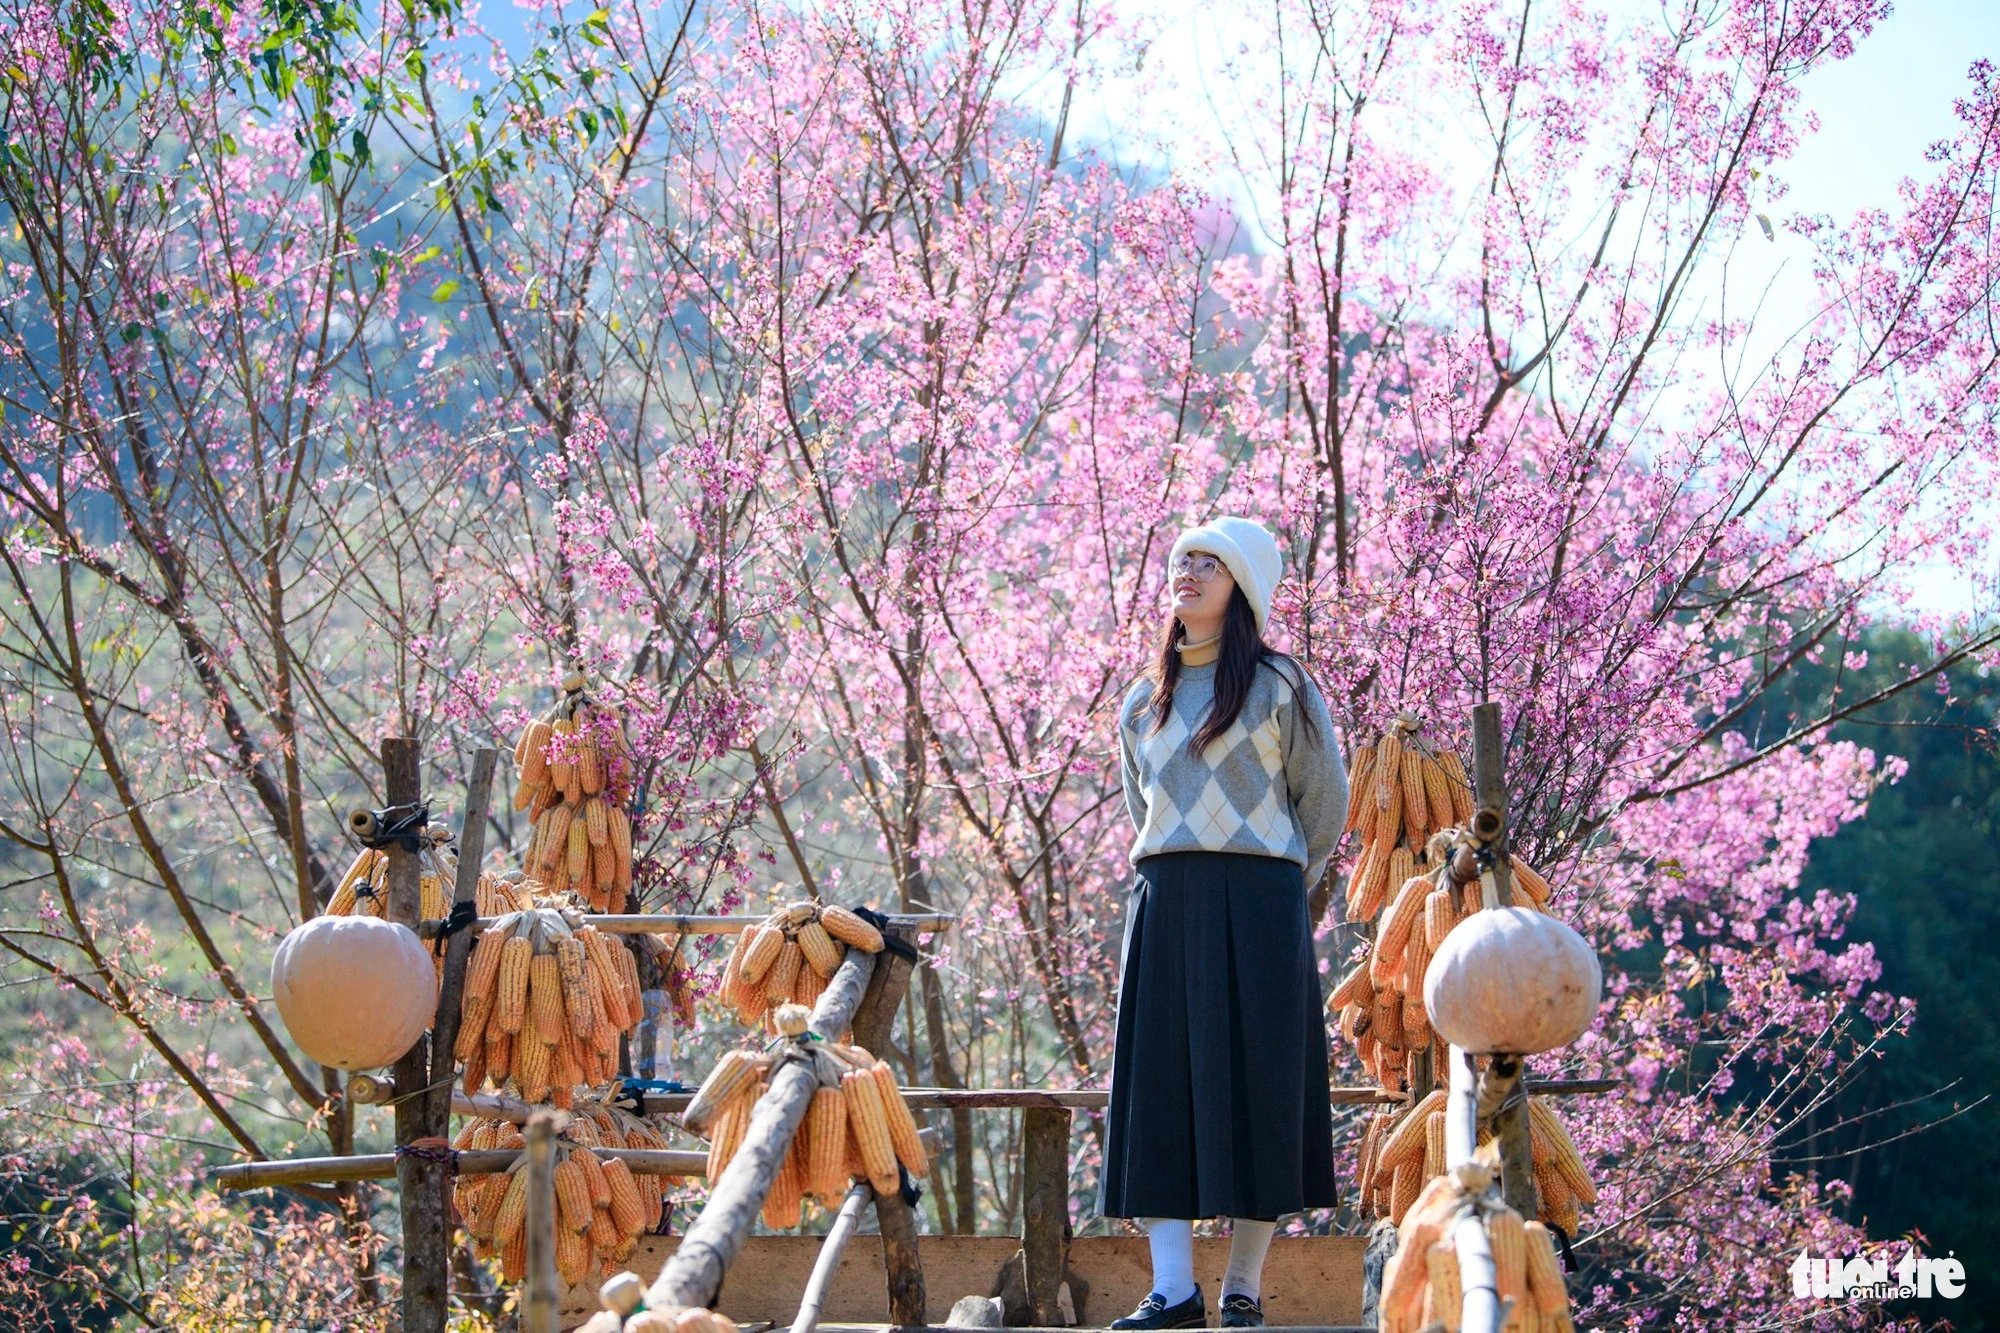 Ha Thu Thuy, a tourist from the northern province of Phu Tho, poses for a photo with blooming wild Himalayan cherry blossoms while visiting Mu Cang Chai District, Yen Bai Province, Vietnam. Photo: Nam Tran / Tuoi Tre